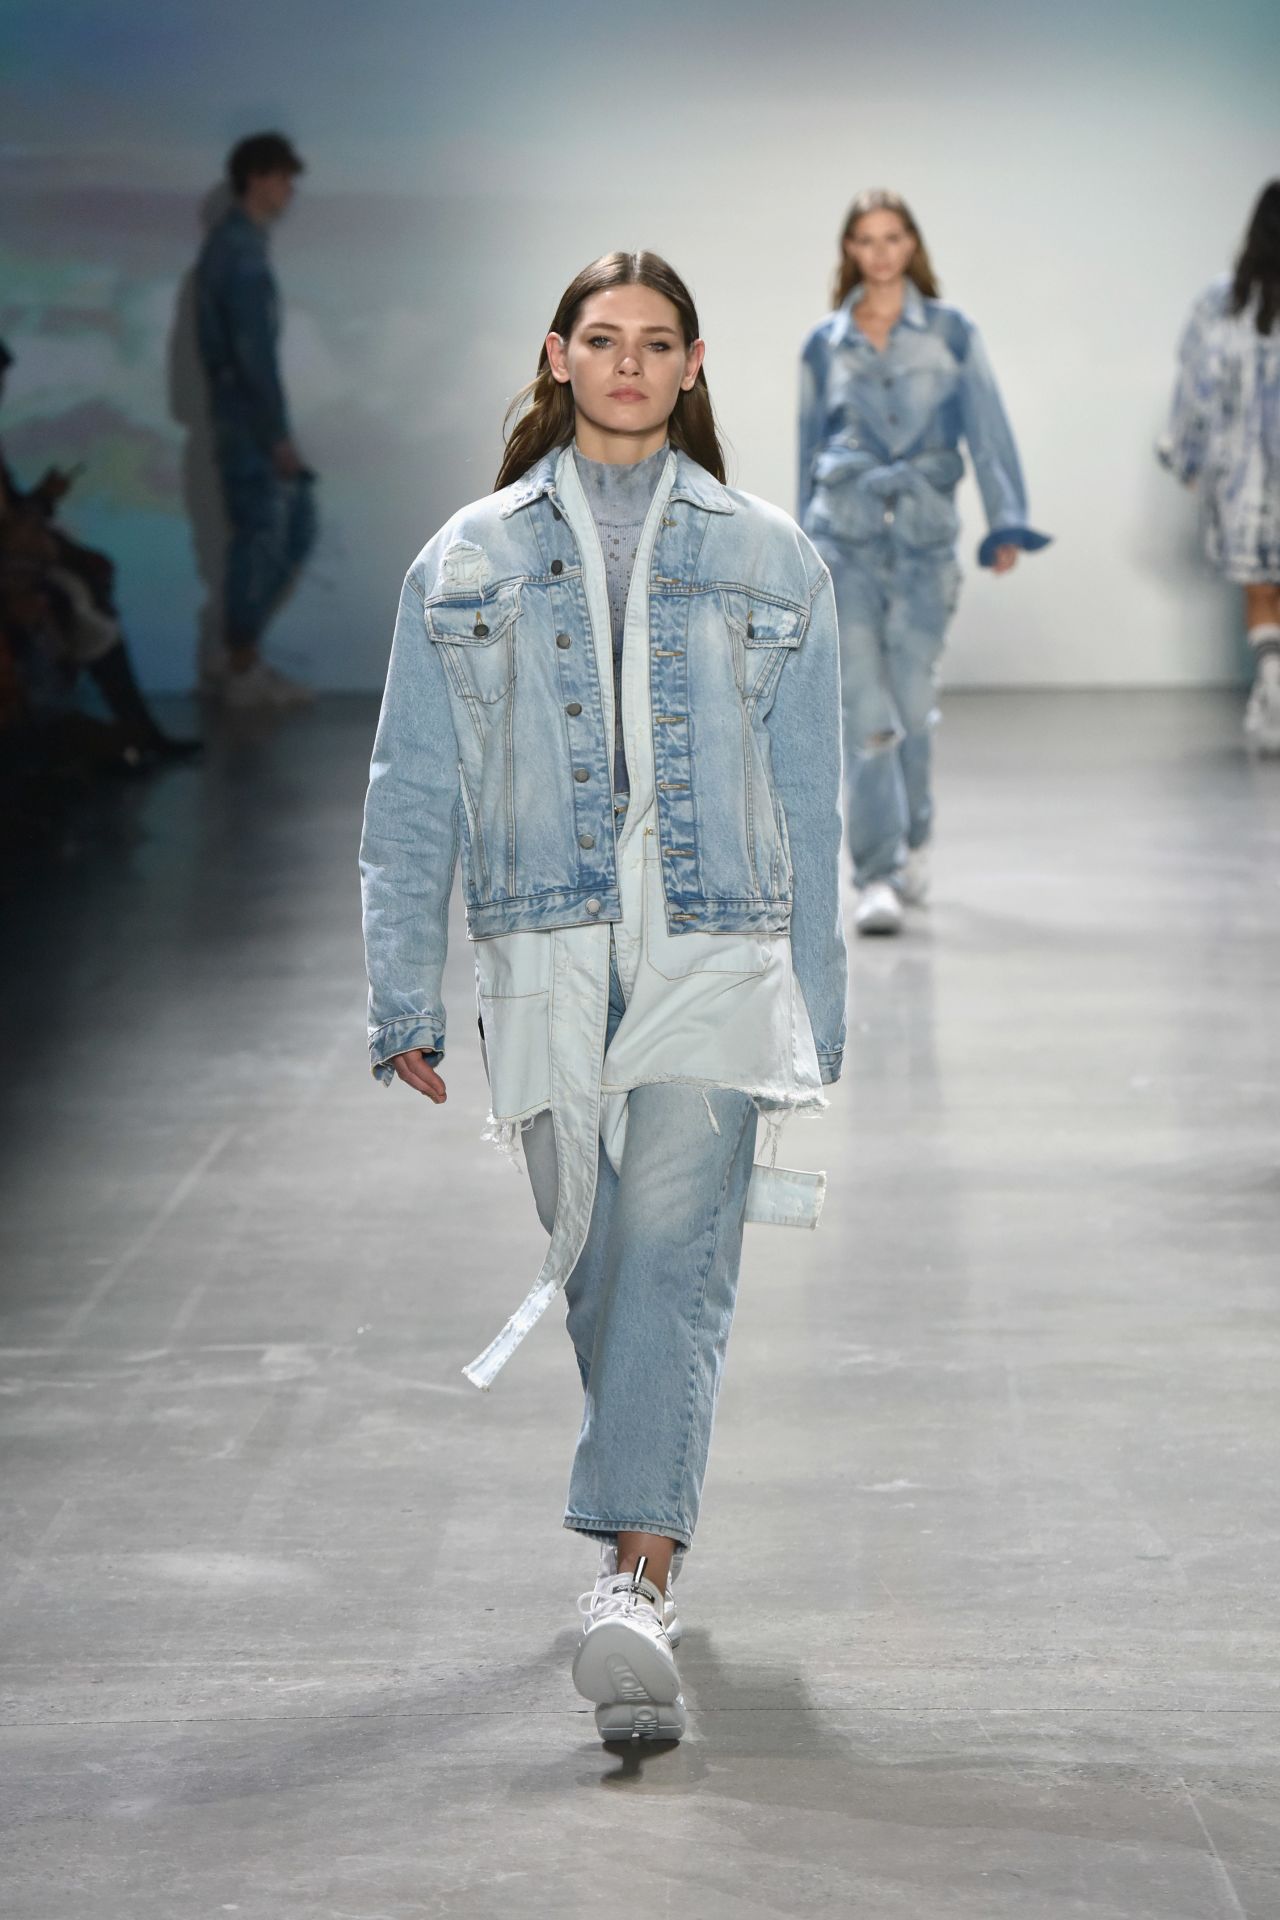 A model walks on the runway during New York Fashion Week in February 2019. 